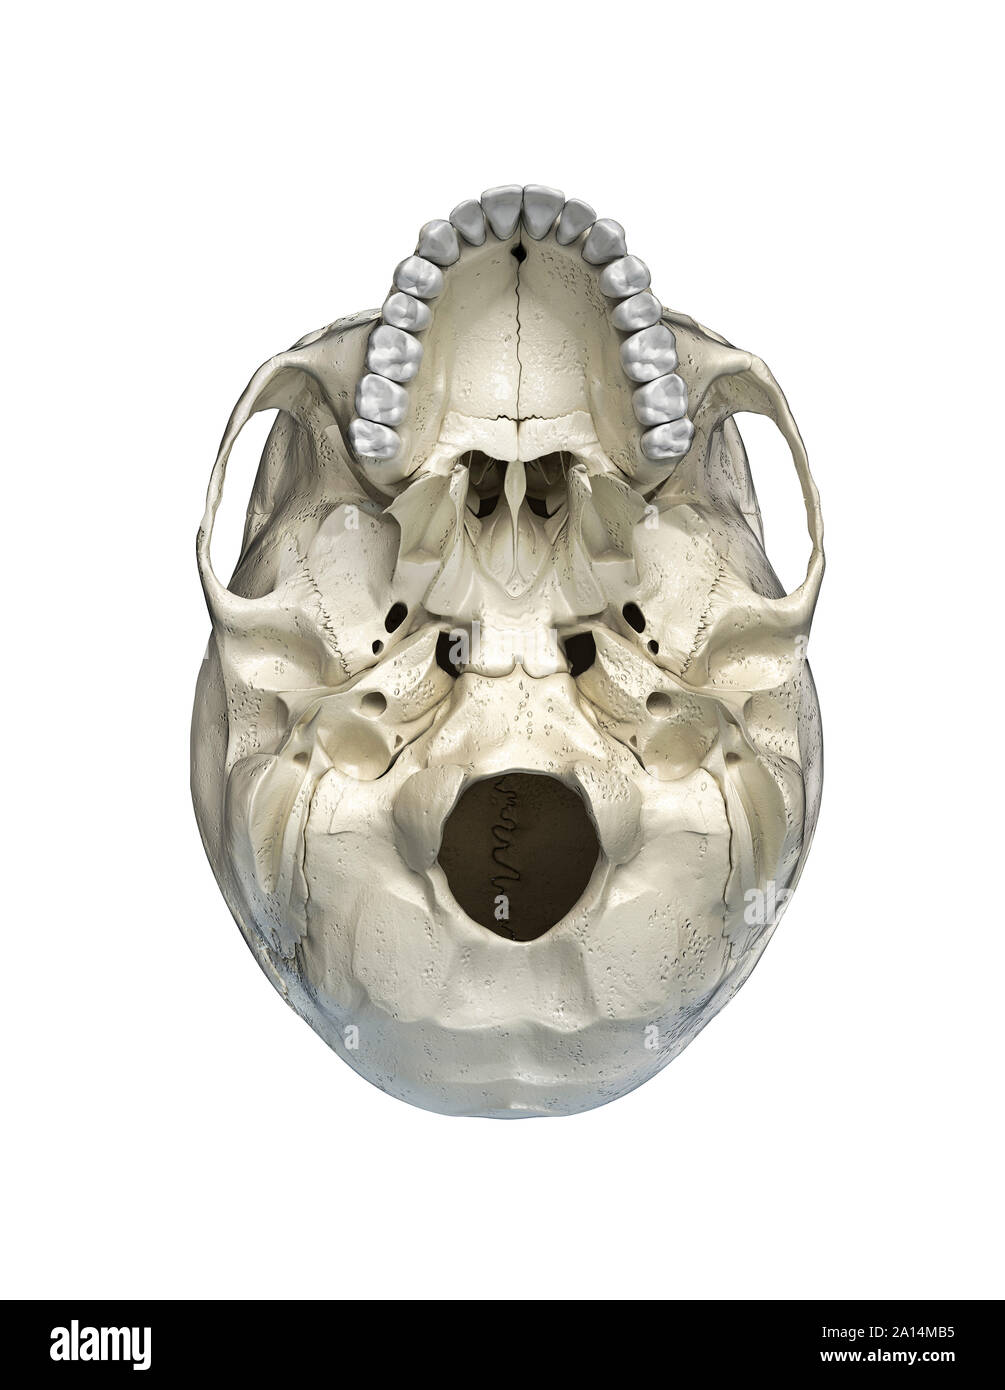 Human skull viewed from the bottom, on white background. Stock Photo